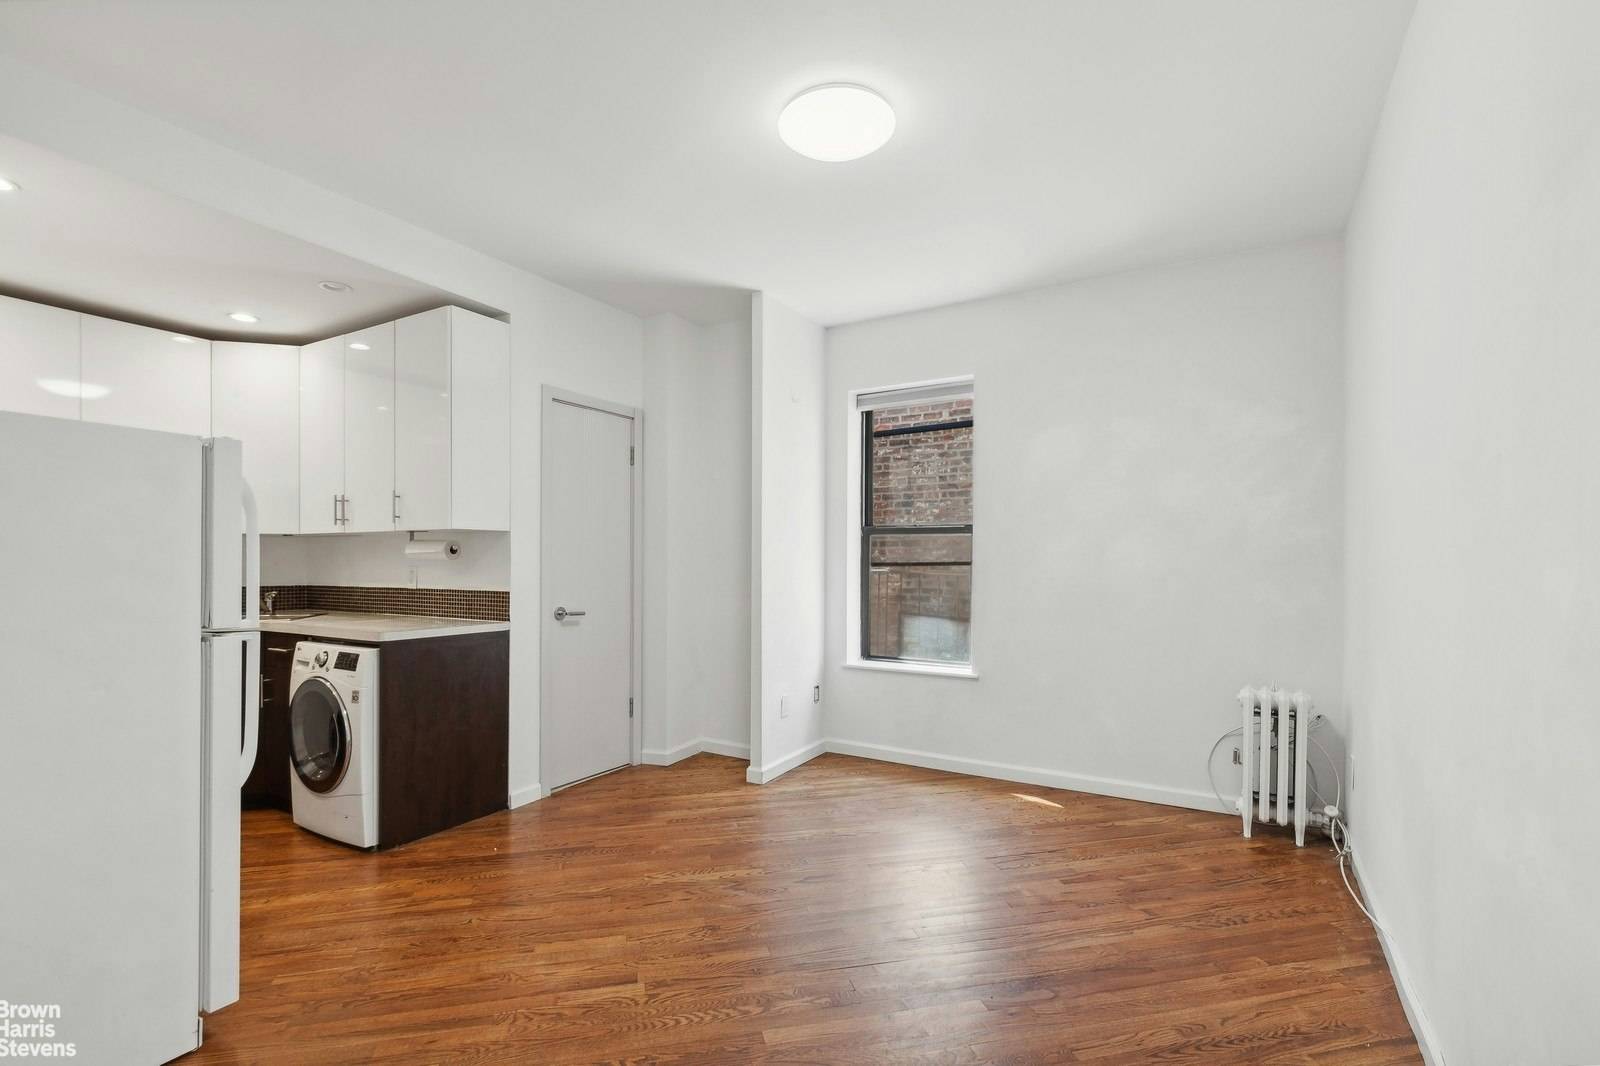 Welcome to 3C at 195 Prospect Park West ideally located across the street from Prospect Park.